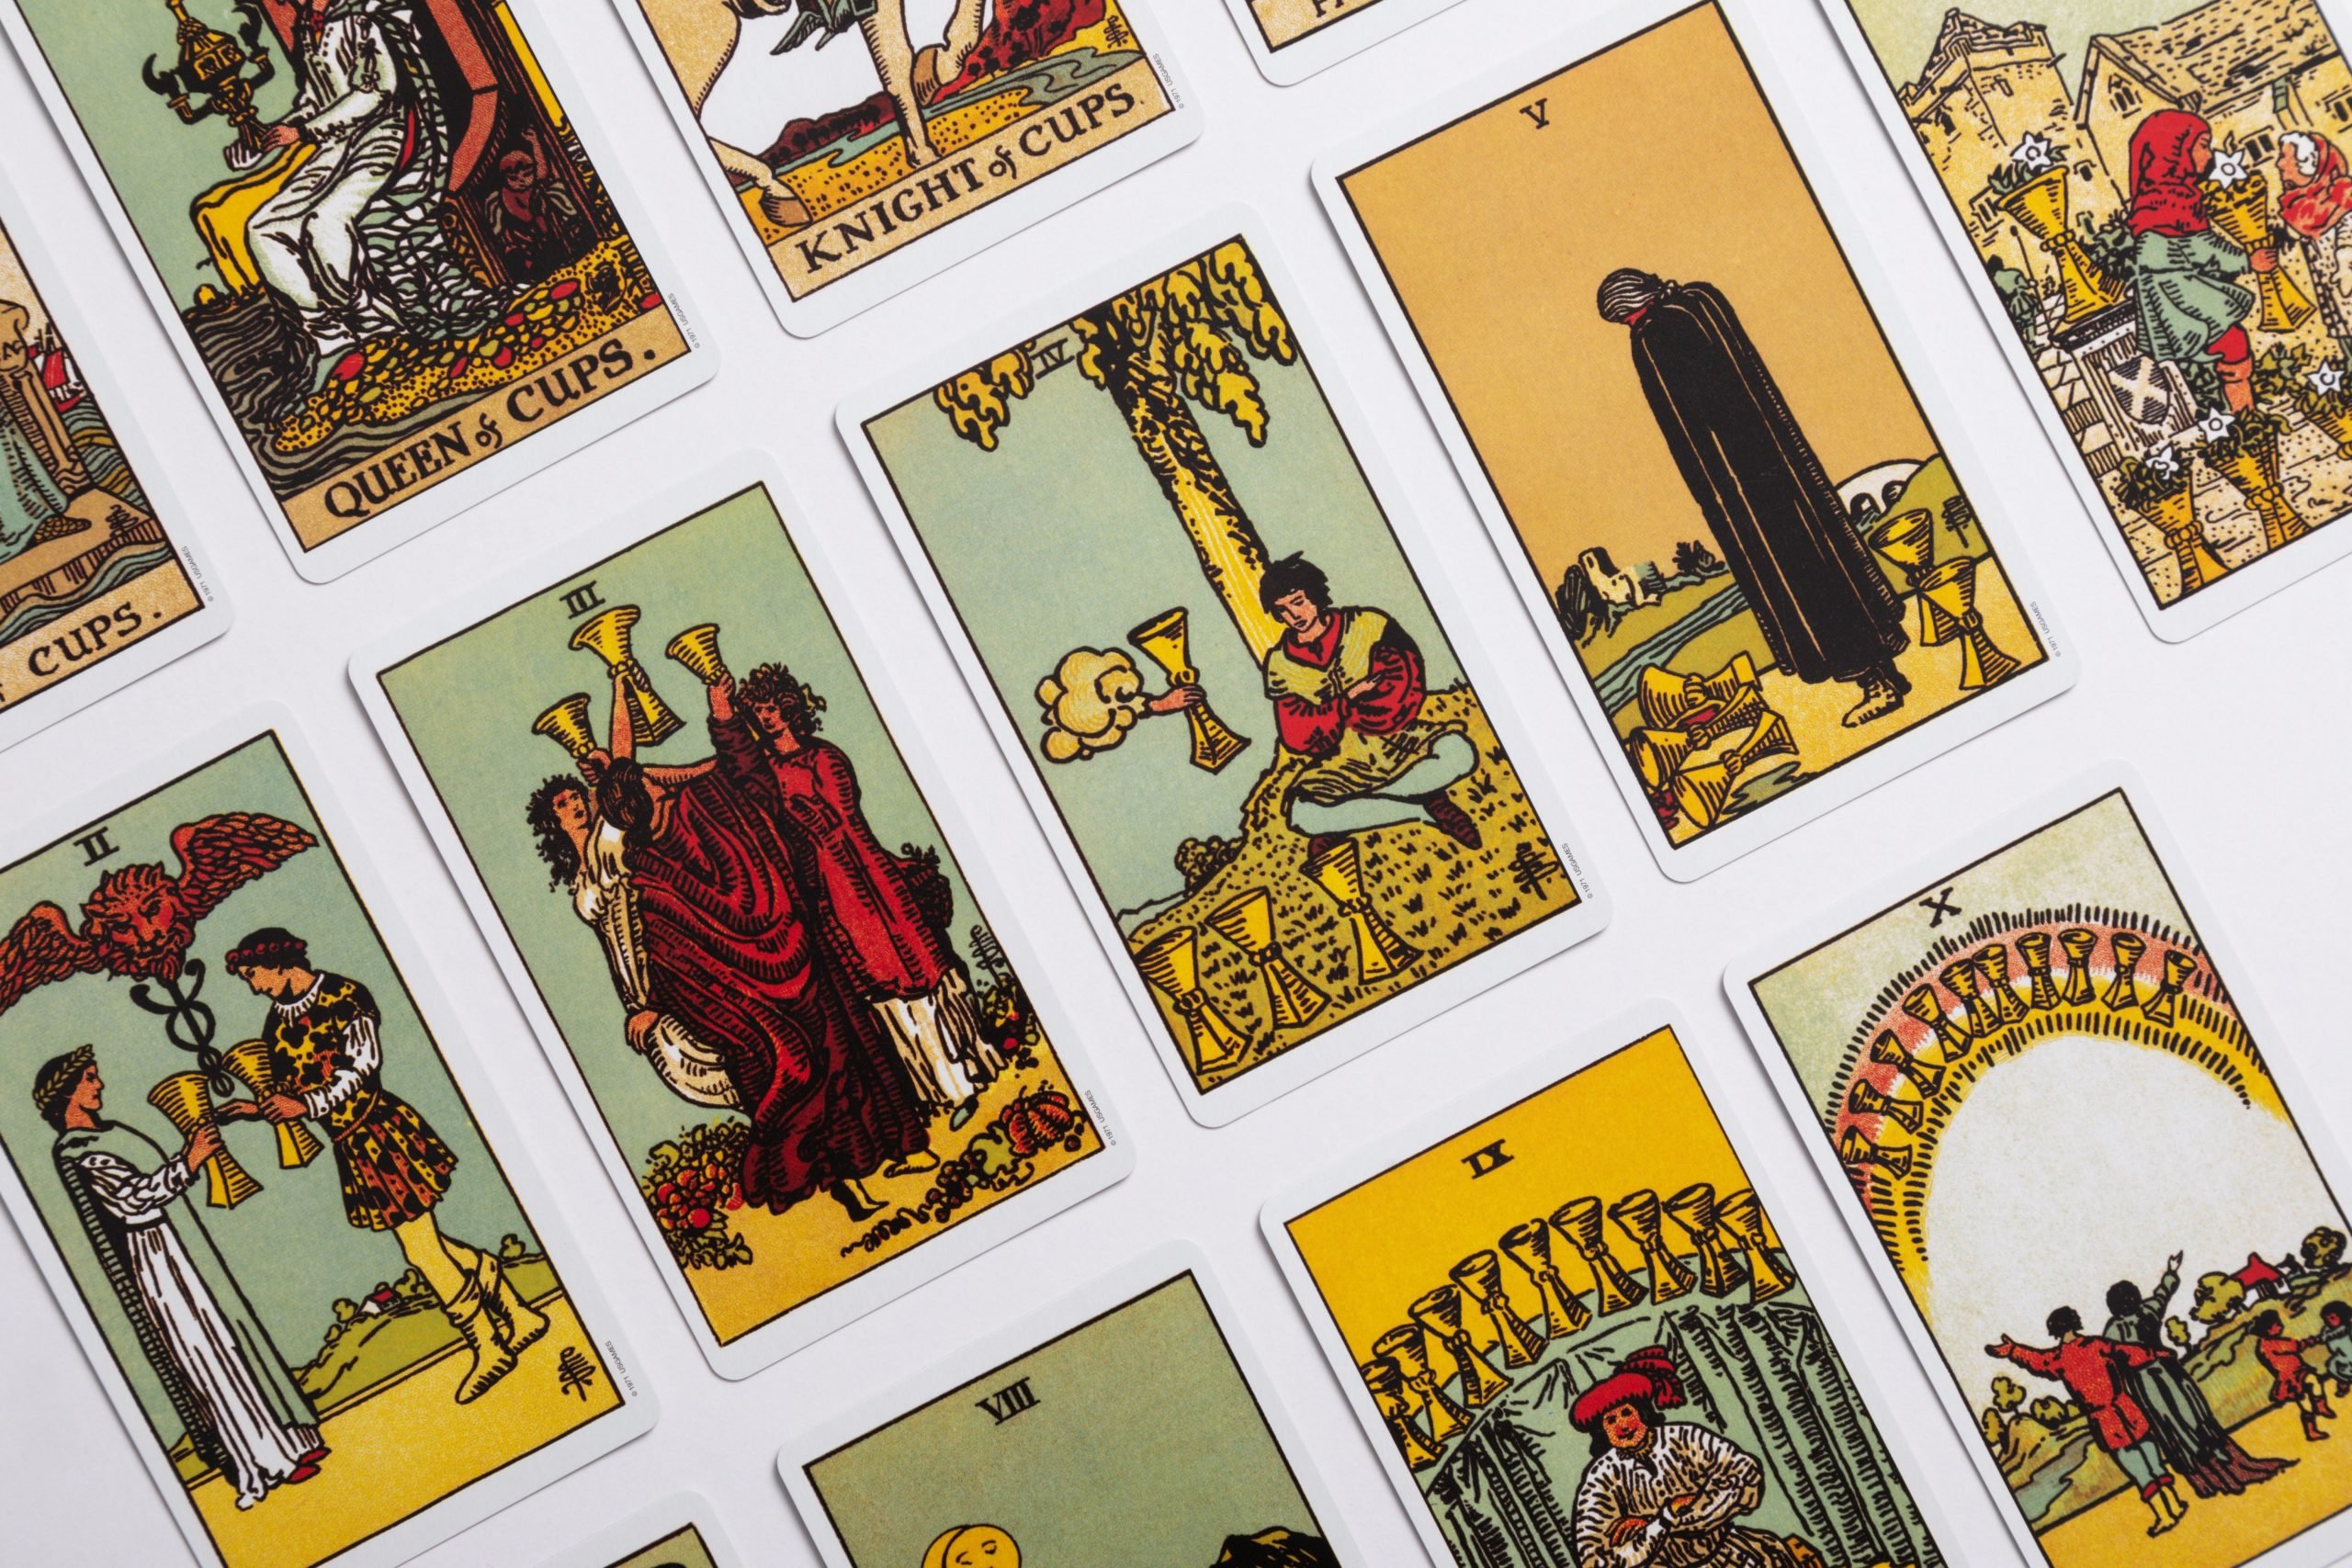 Are Tarot Cards Bad, Cursed, or Demonic in Any Way?